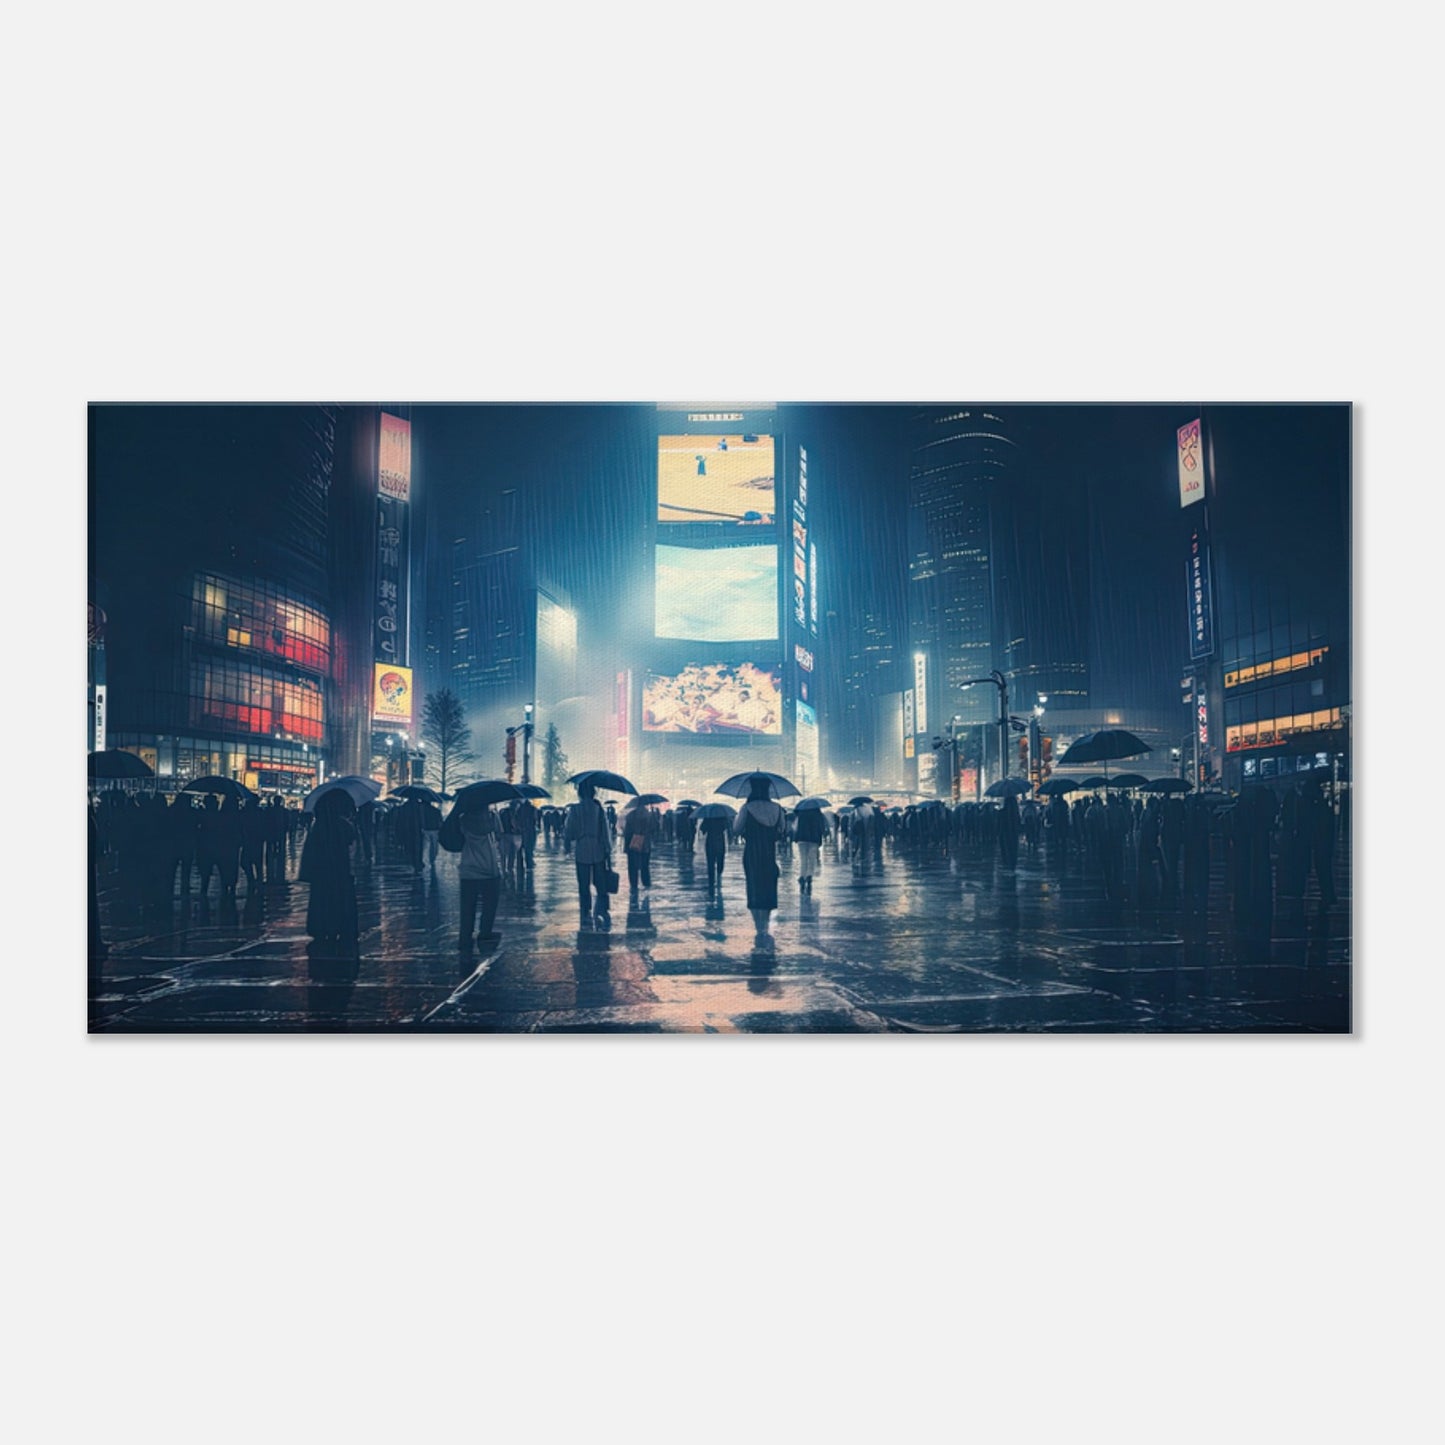 Shibuya Crossing in the Ran Artwork AllStyleArt Thick 30x60 cm / 12x24" 